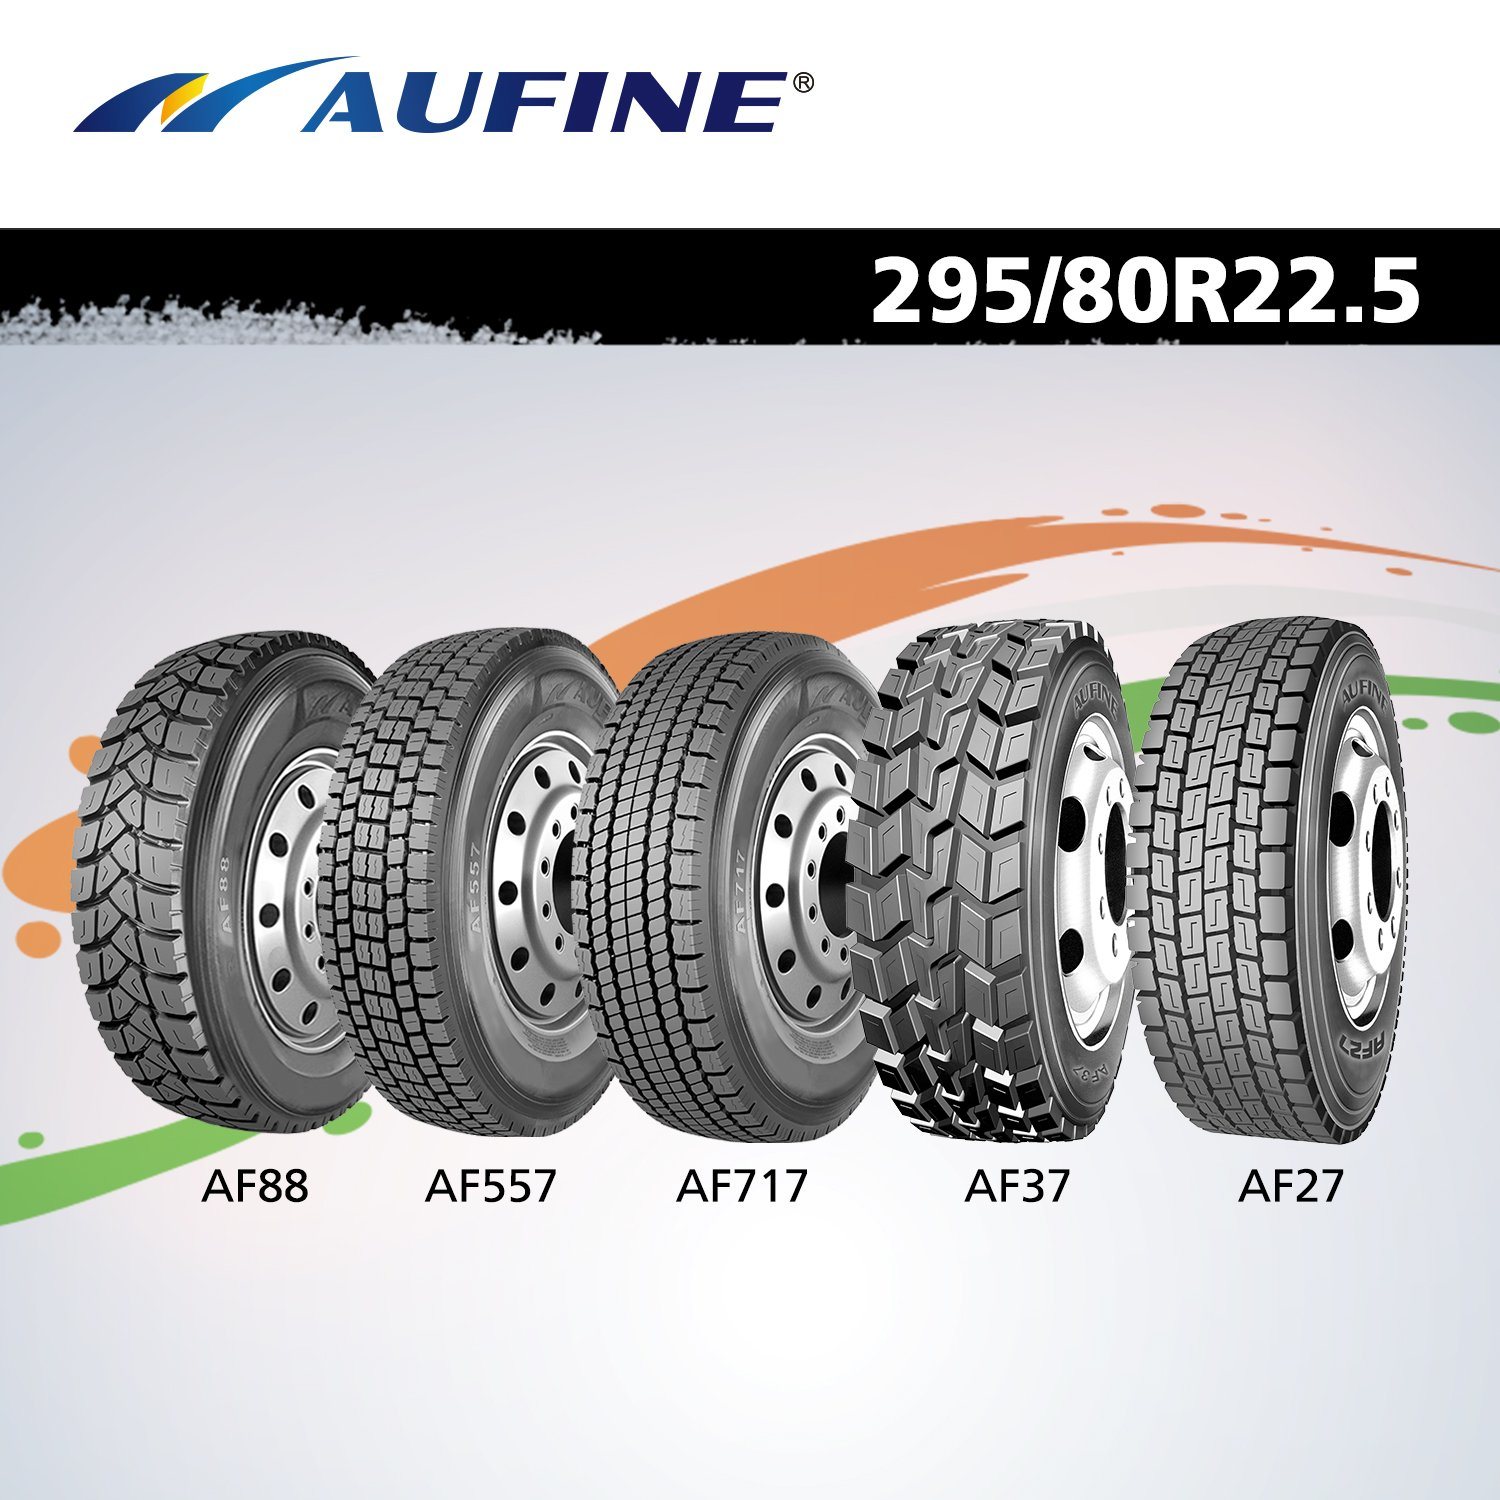 Aufine TBR Tyre with Smartway, Nom and DOT (11R22.5, 11R24.5)